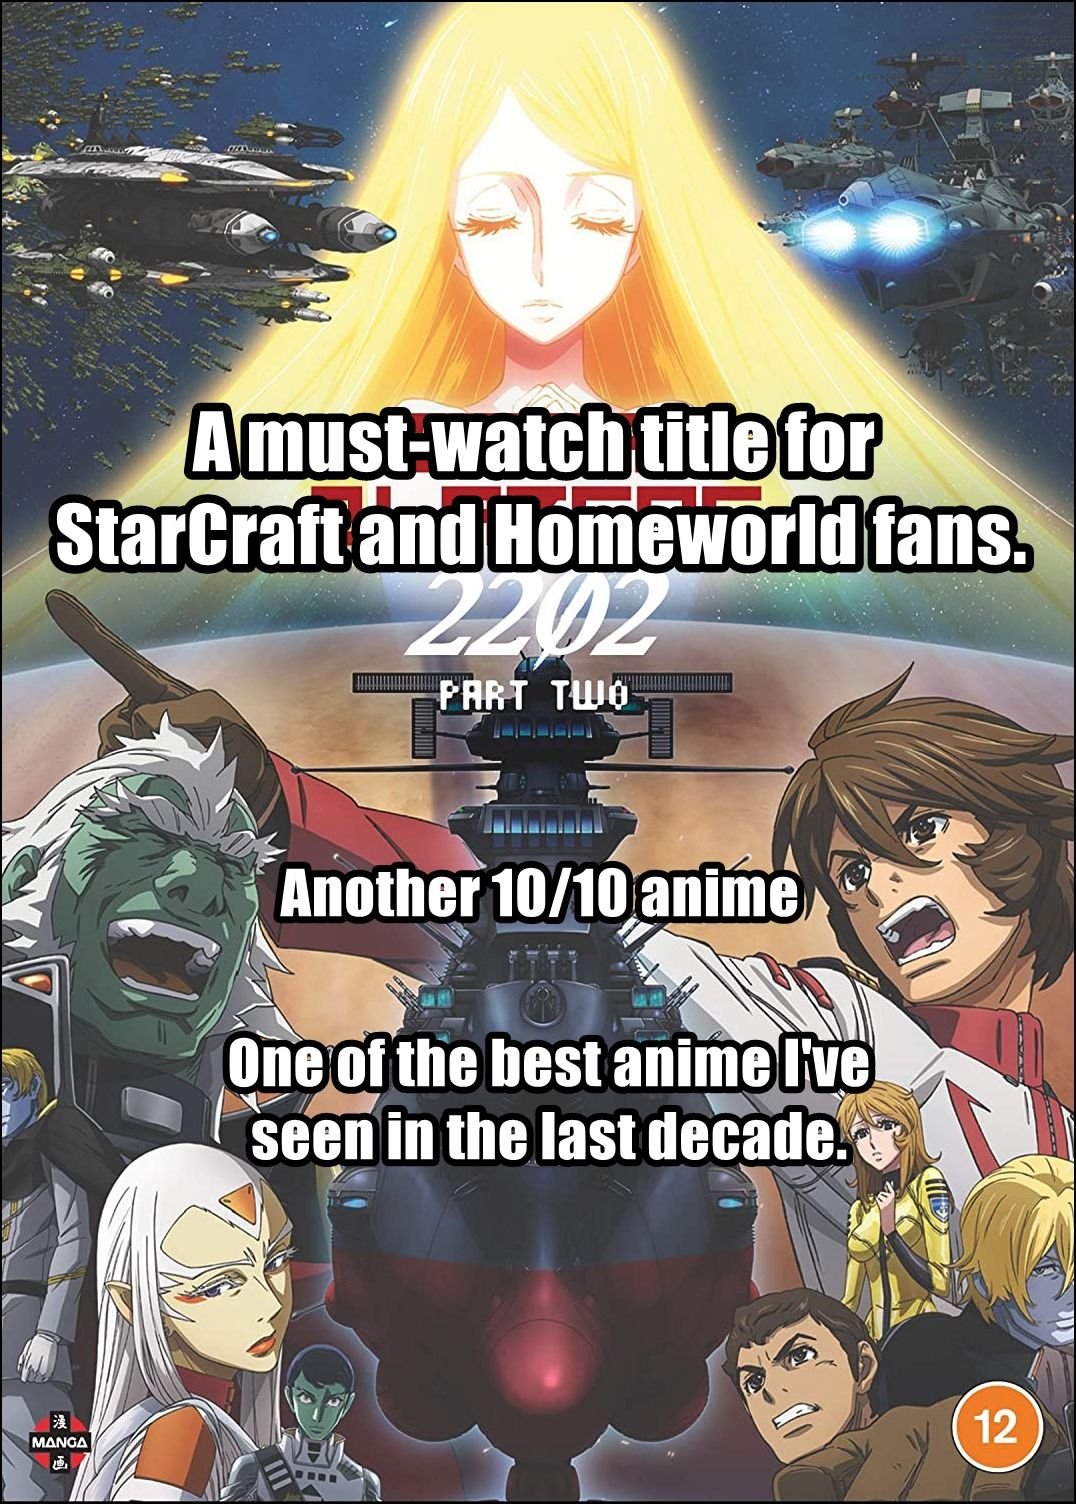 Anime Worth Watching: Fate/ Franchise – The Avocado